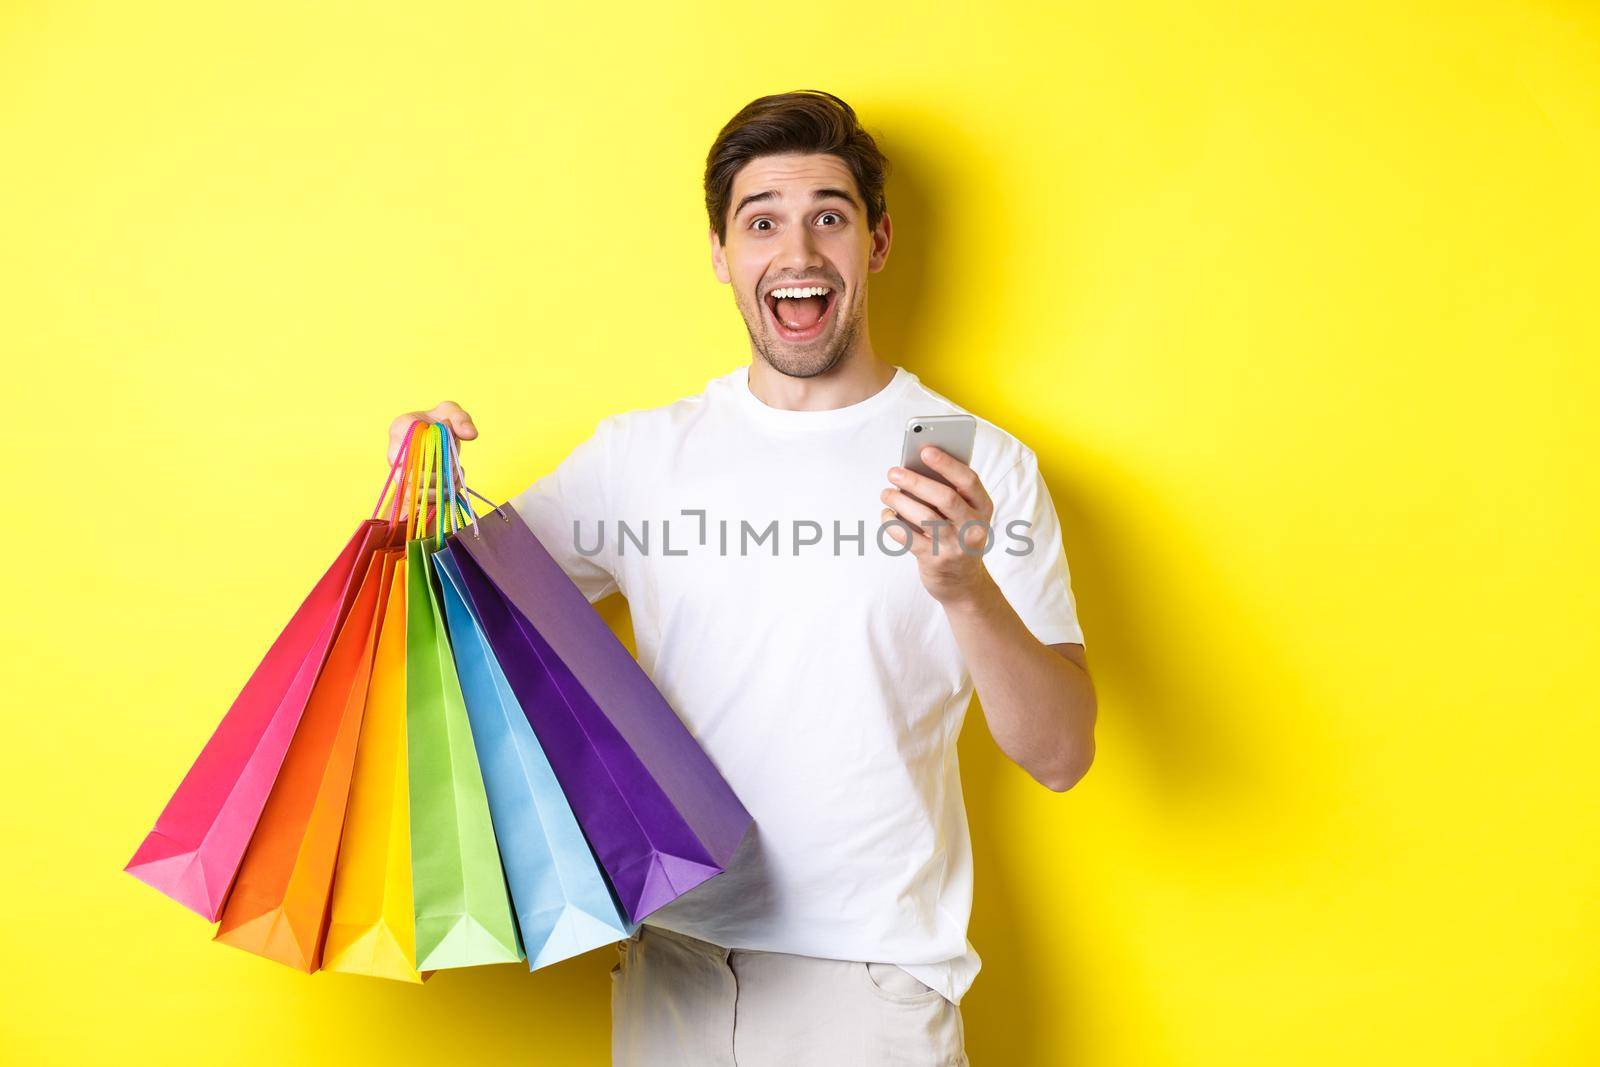 Image of happy man receive cashback for purchase, holding smartphone and shopping bags, smiling excited, standing over yellow background.